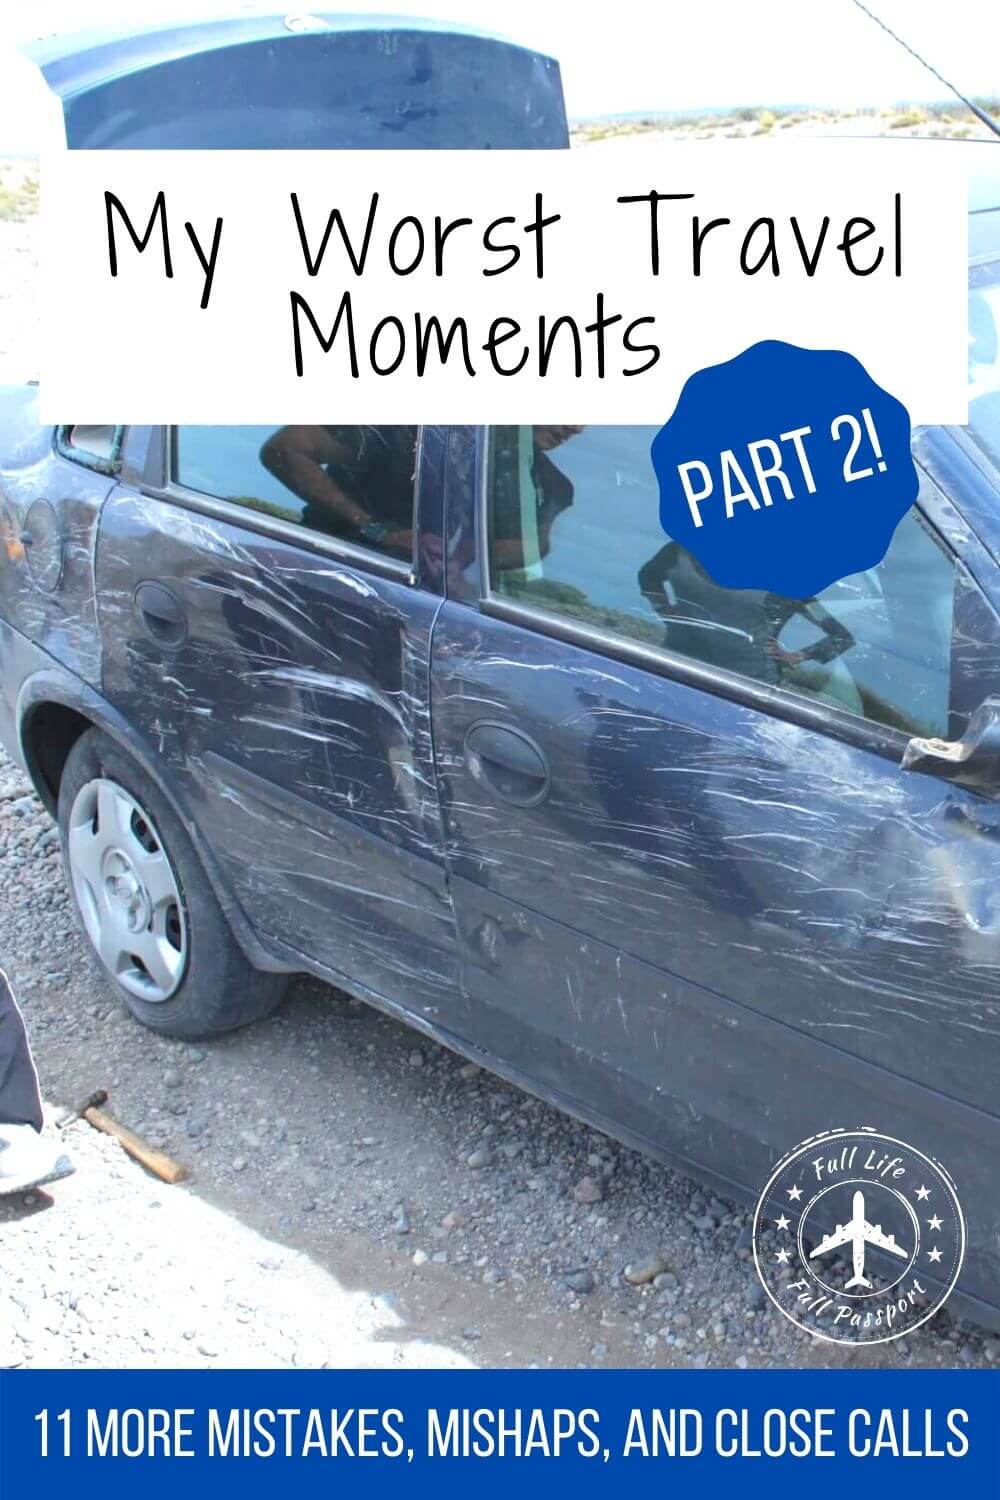 My Worst Travel Moments: Part II